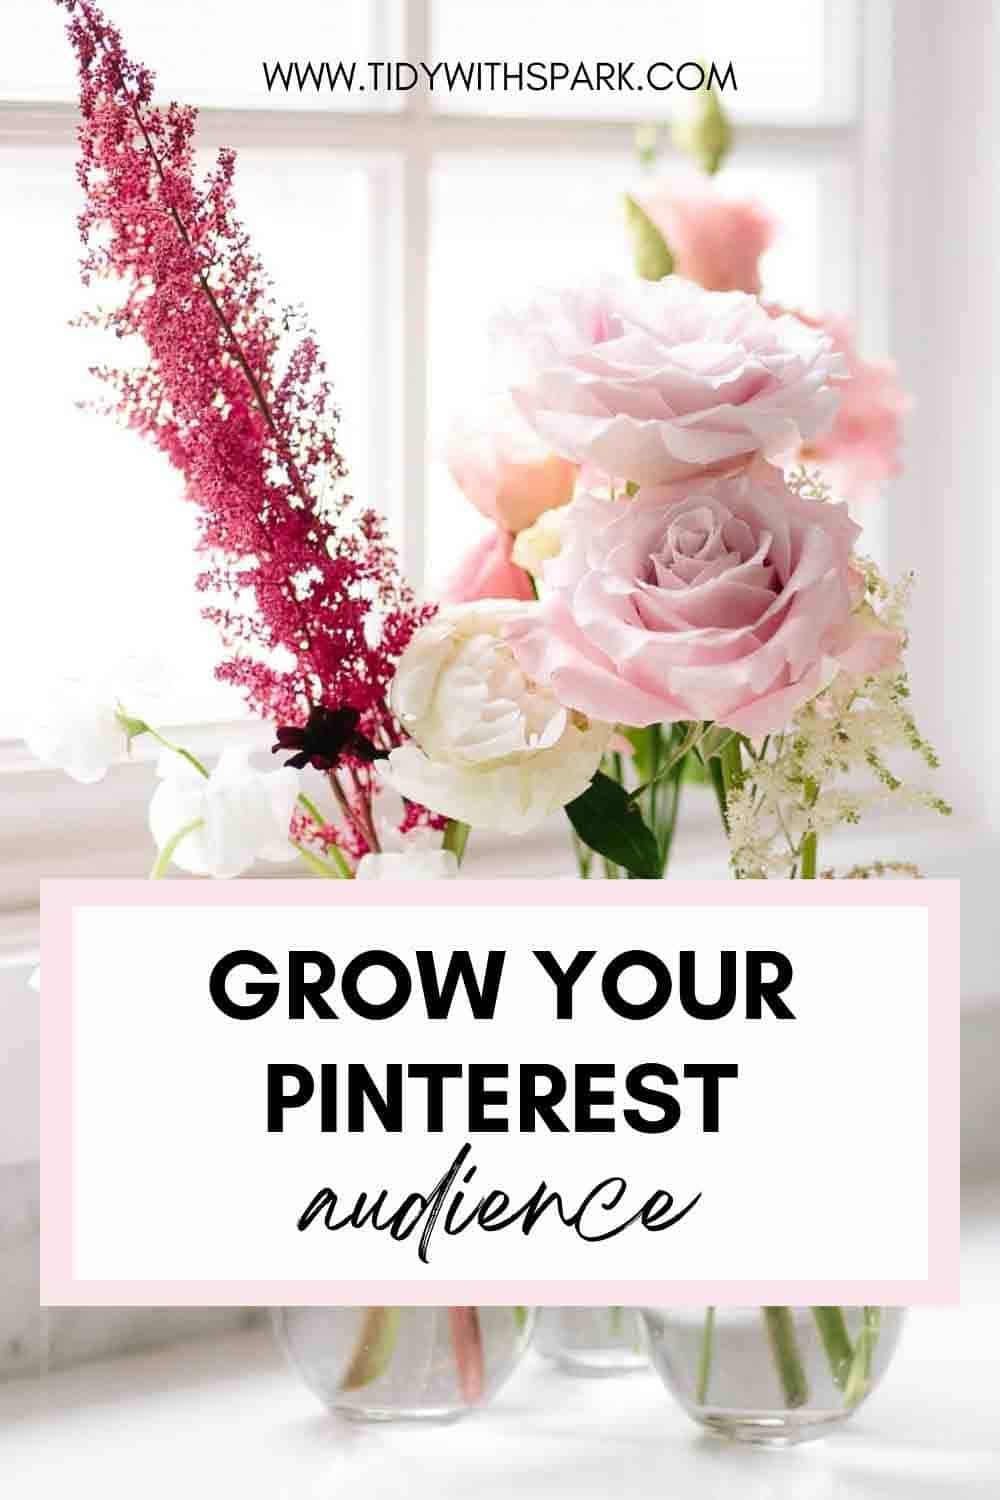 How to get your pin noticed on Pinterest - Tidy with SPARK